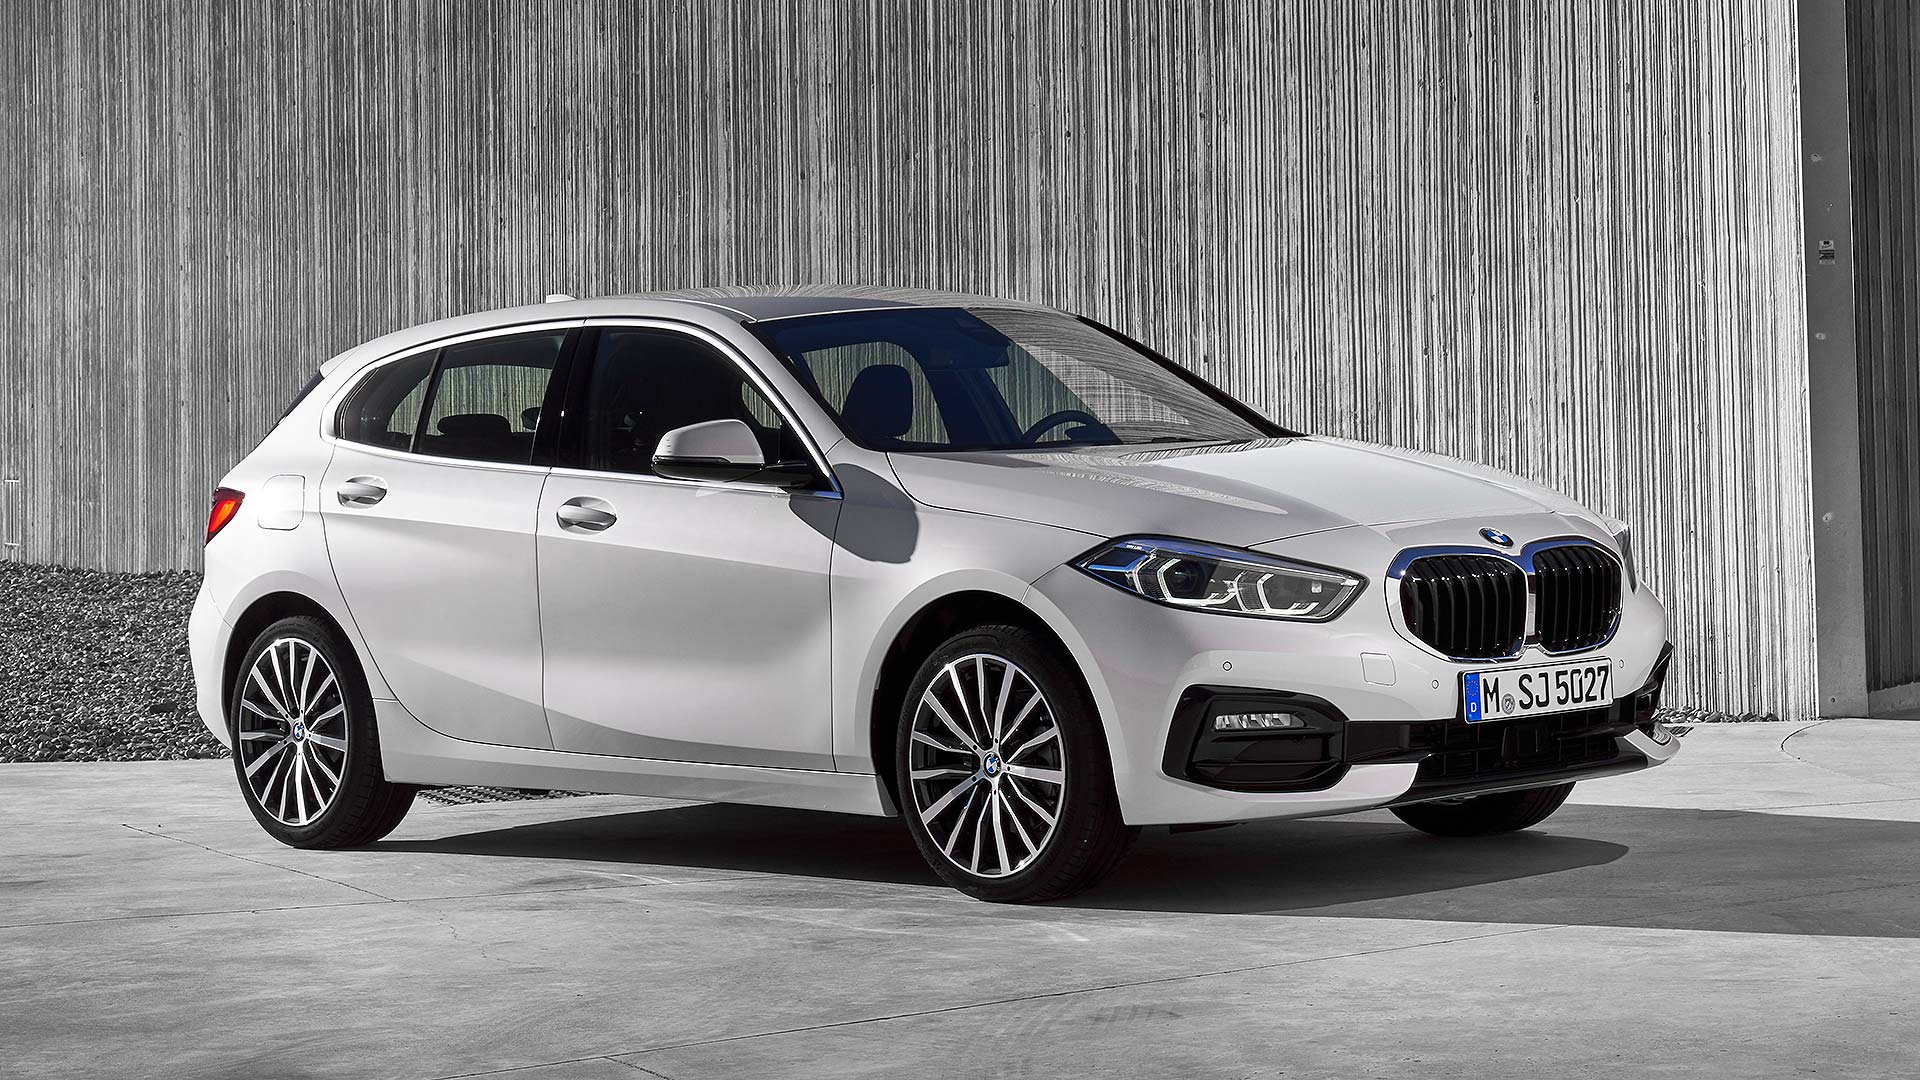 New BMW 1 Series revealed: full details of the £24,430 premium hatch ...